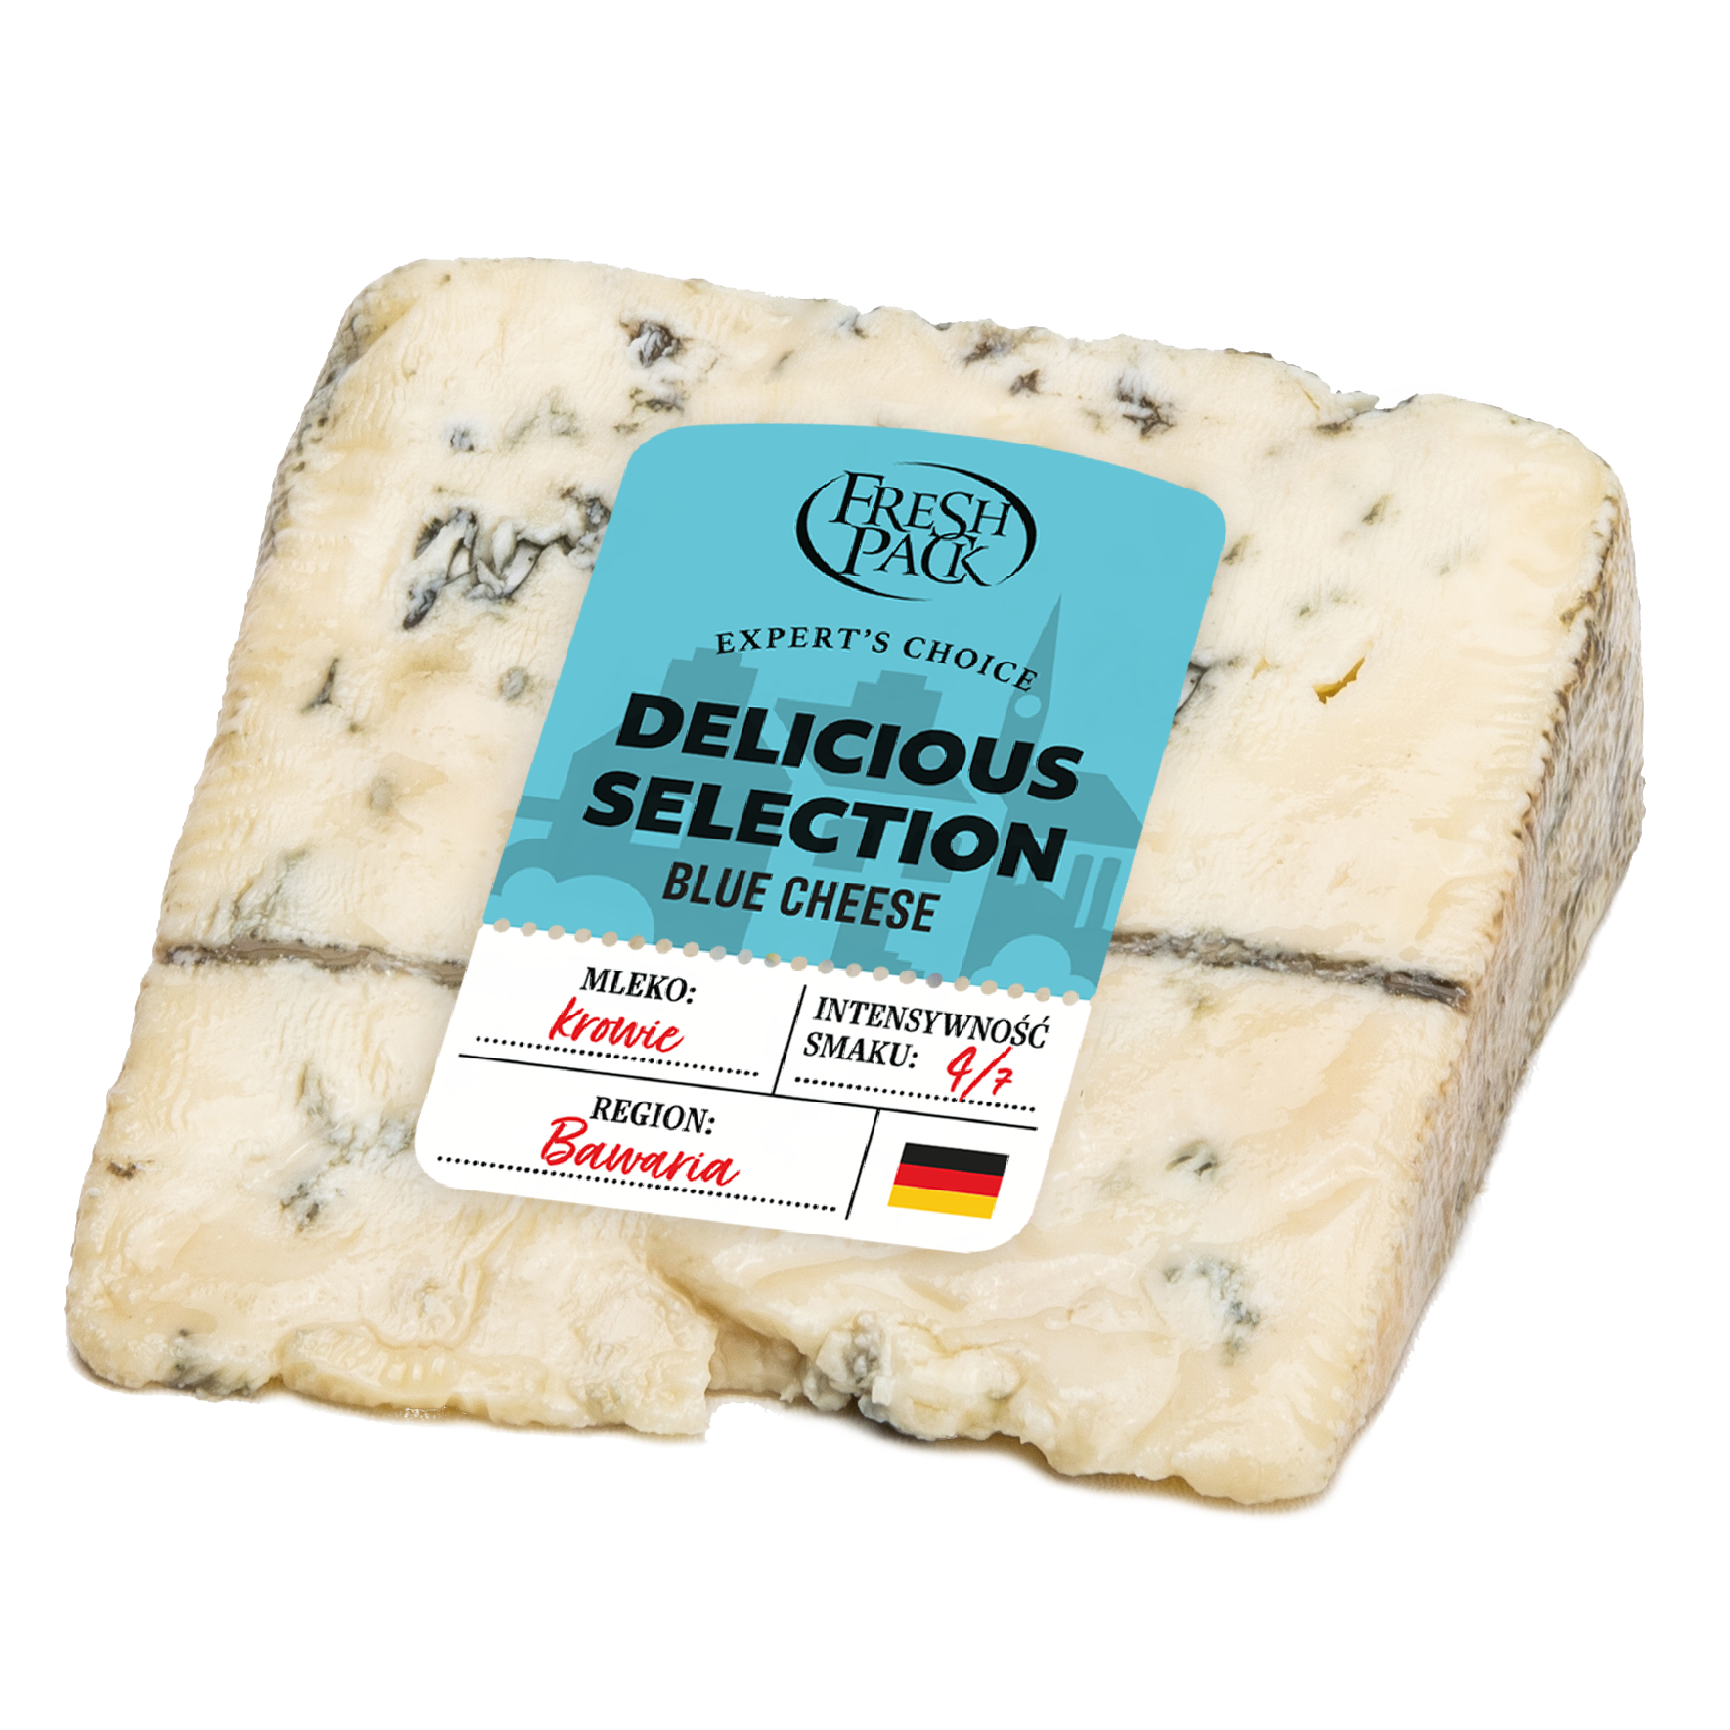 DELICIOUS SELECTION BLUE CHEESE